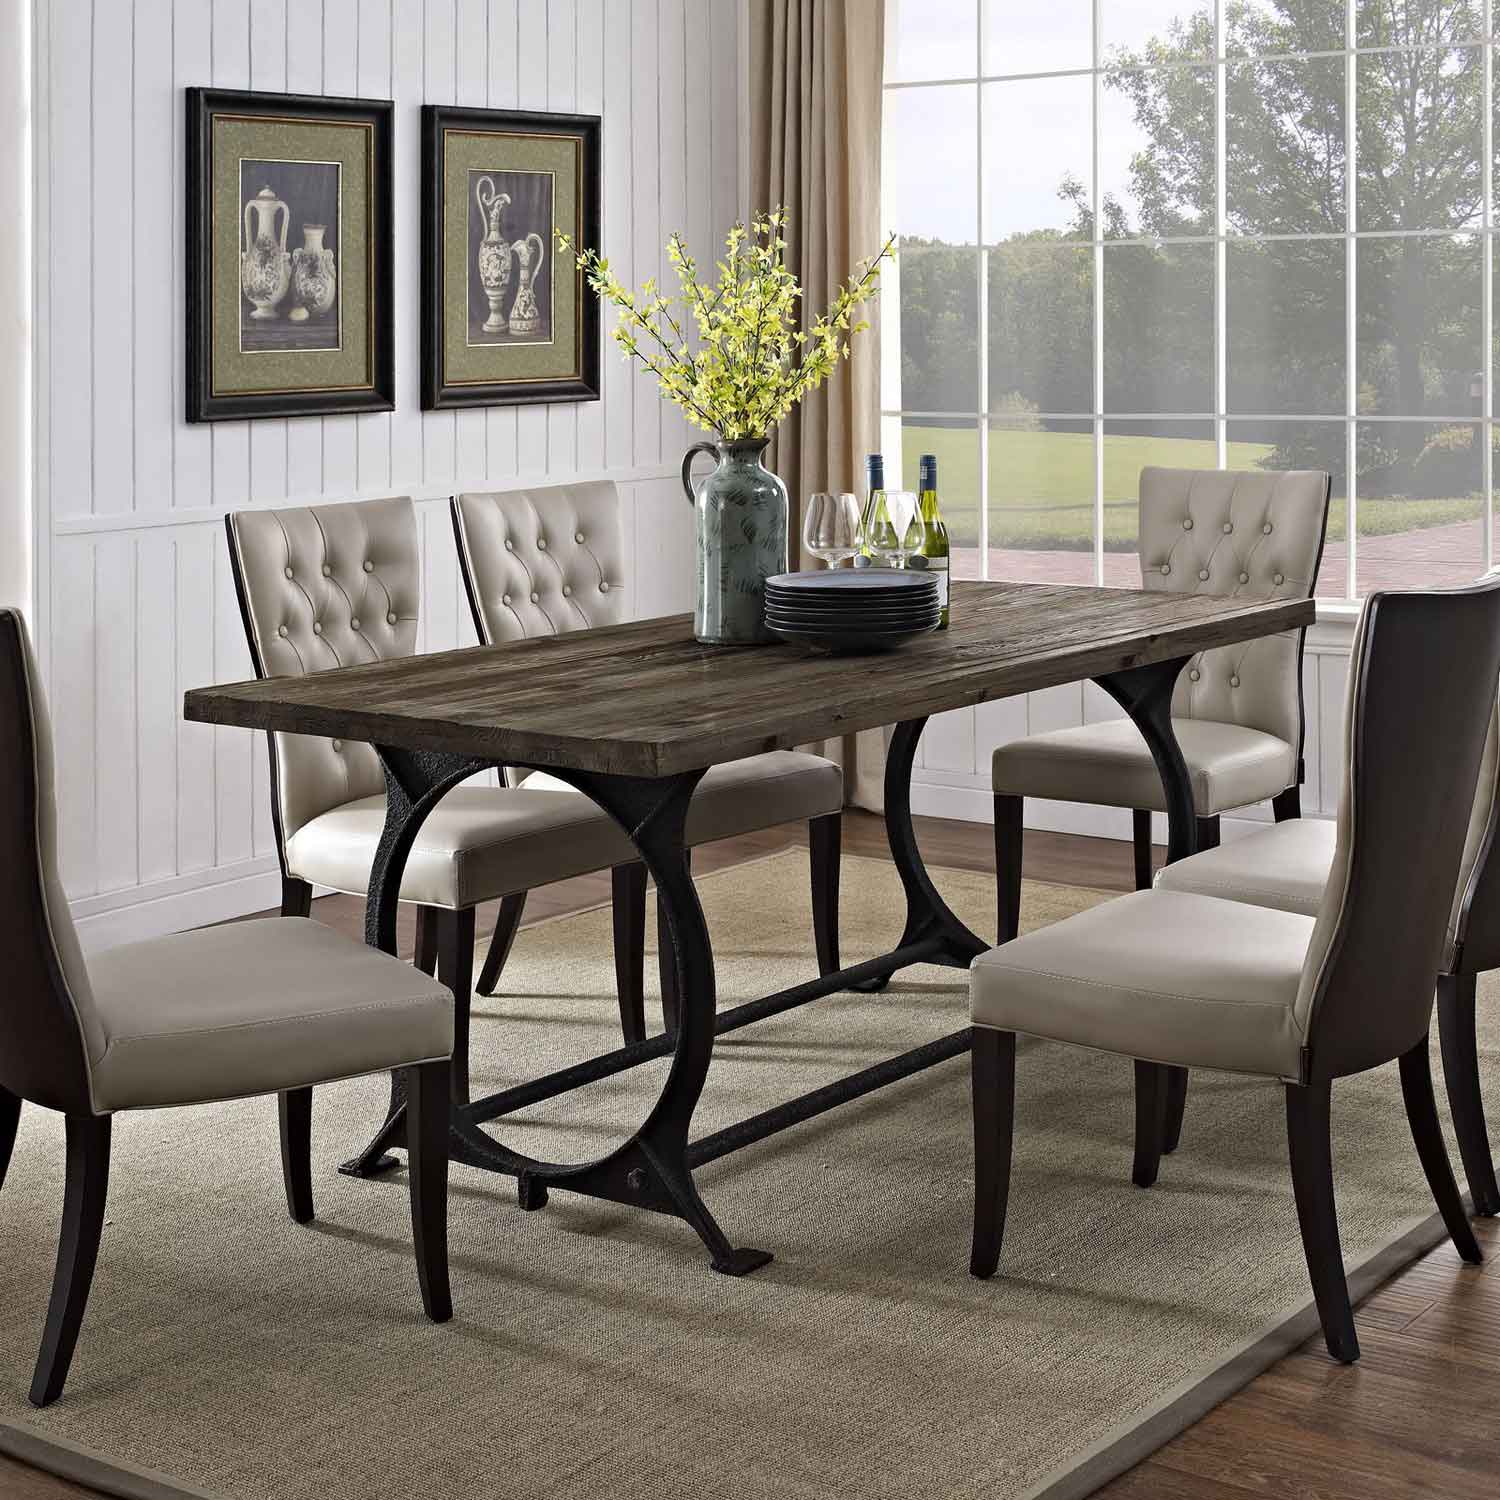 Modway Effuse Wood Top Dining Table - Brown